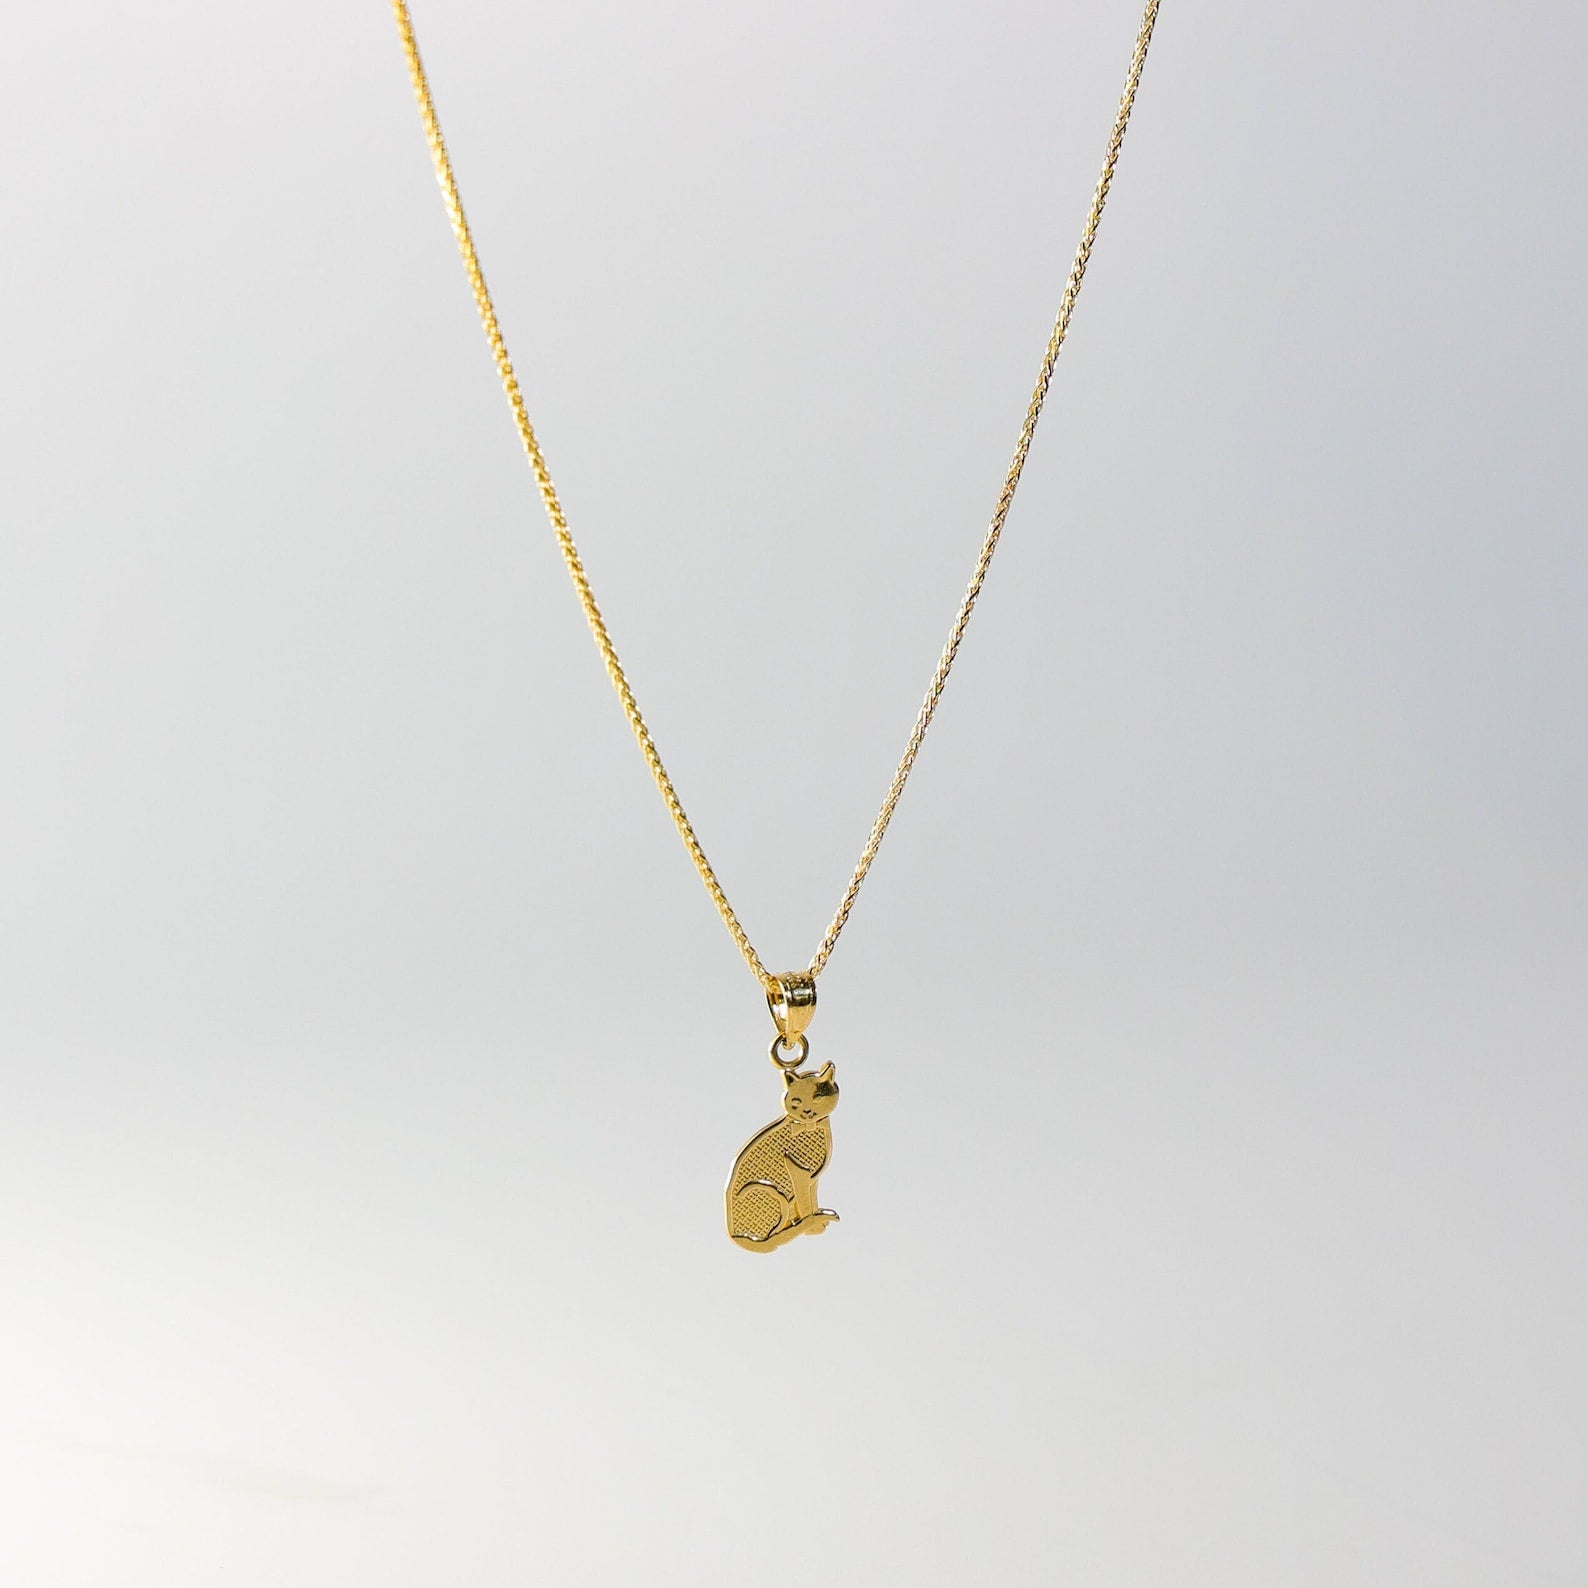 Gold Cat Pendant Model-1659 - Charlie & Co. Jewelry